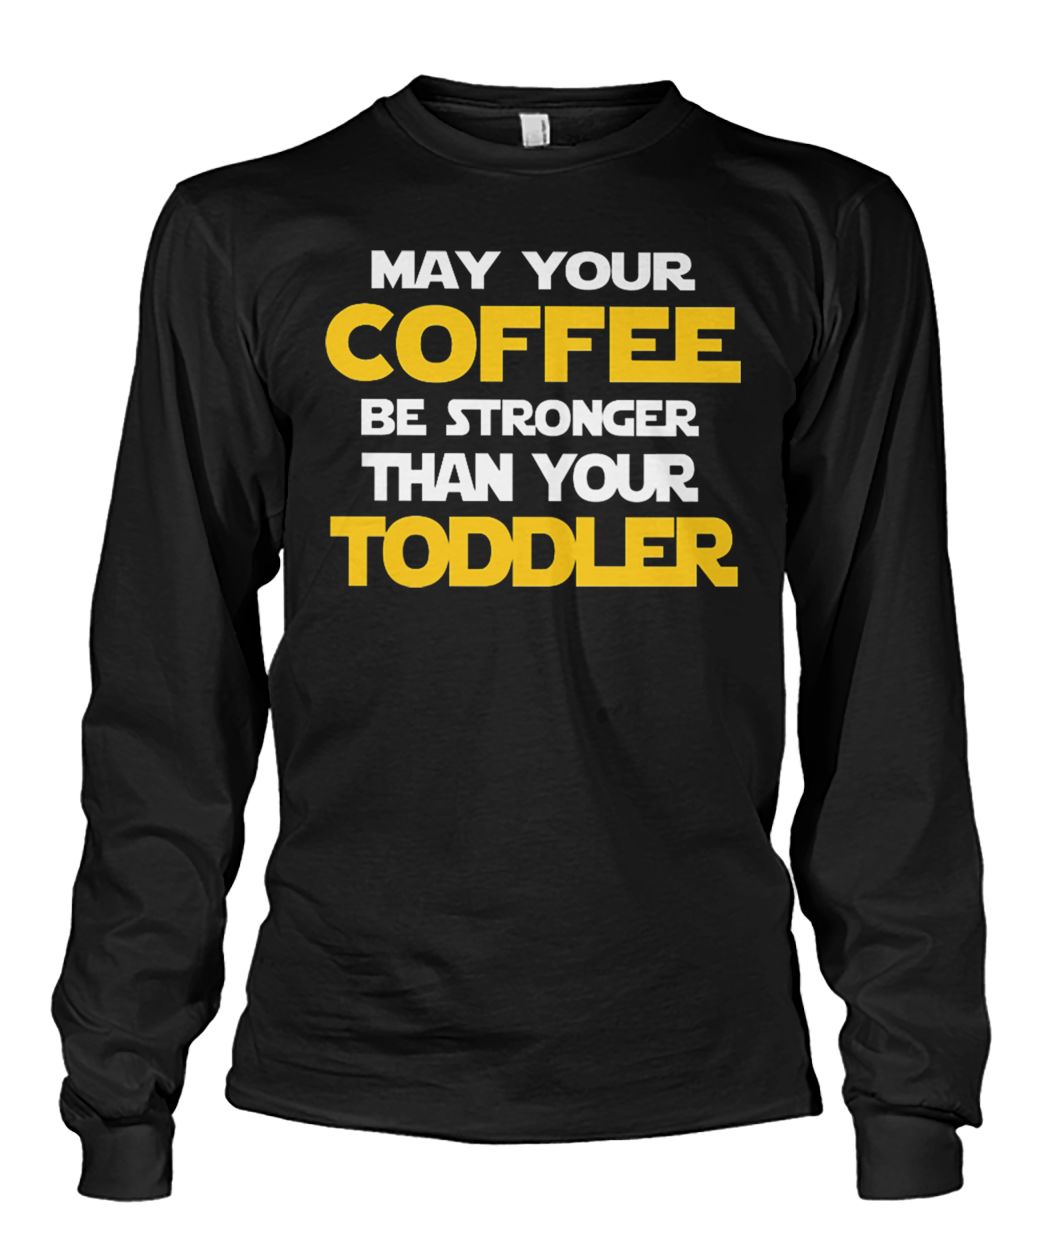 May your coffee be stronger than your toddler unisex long sleeve